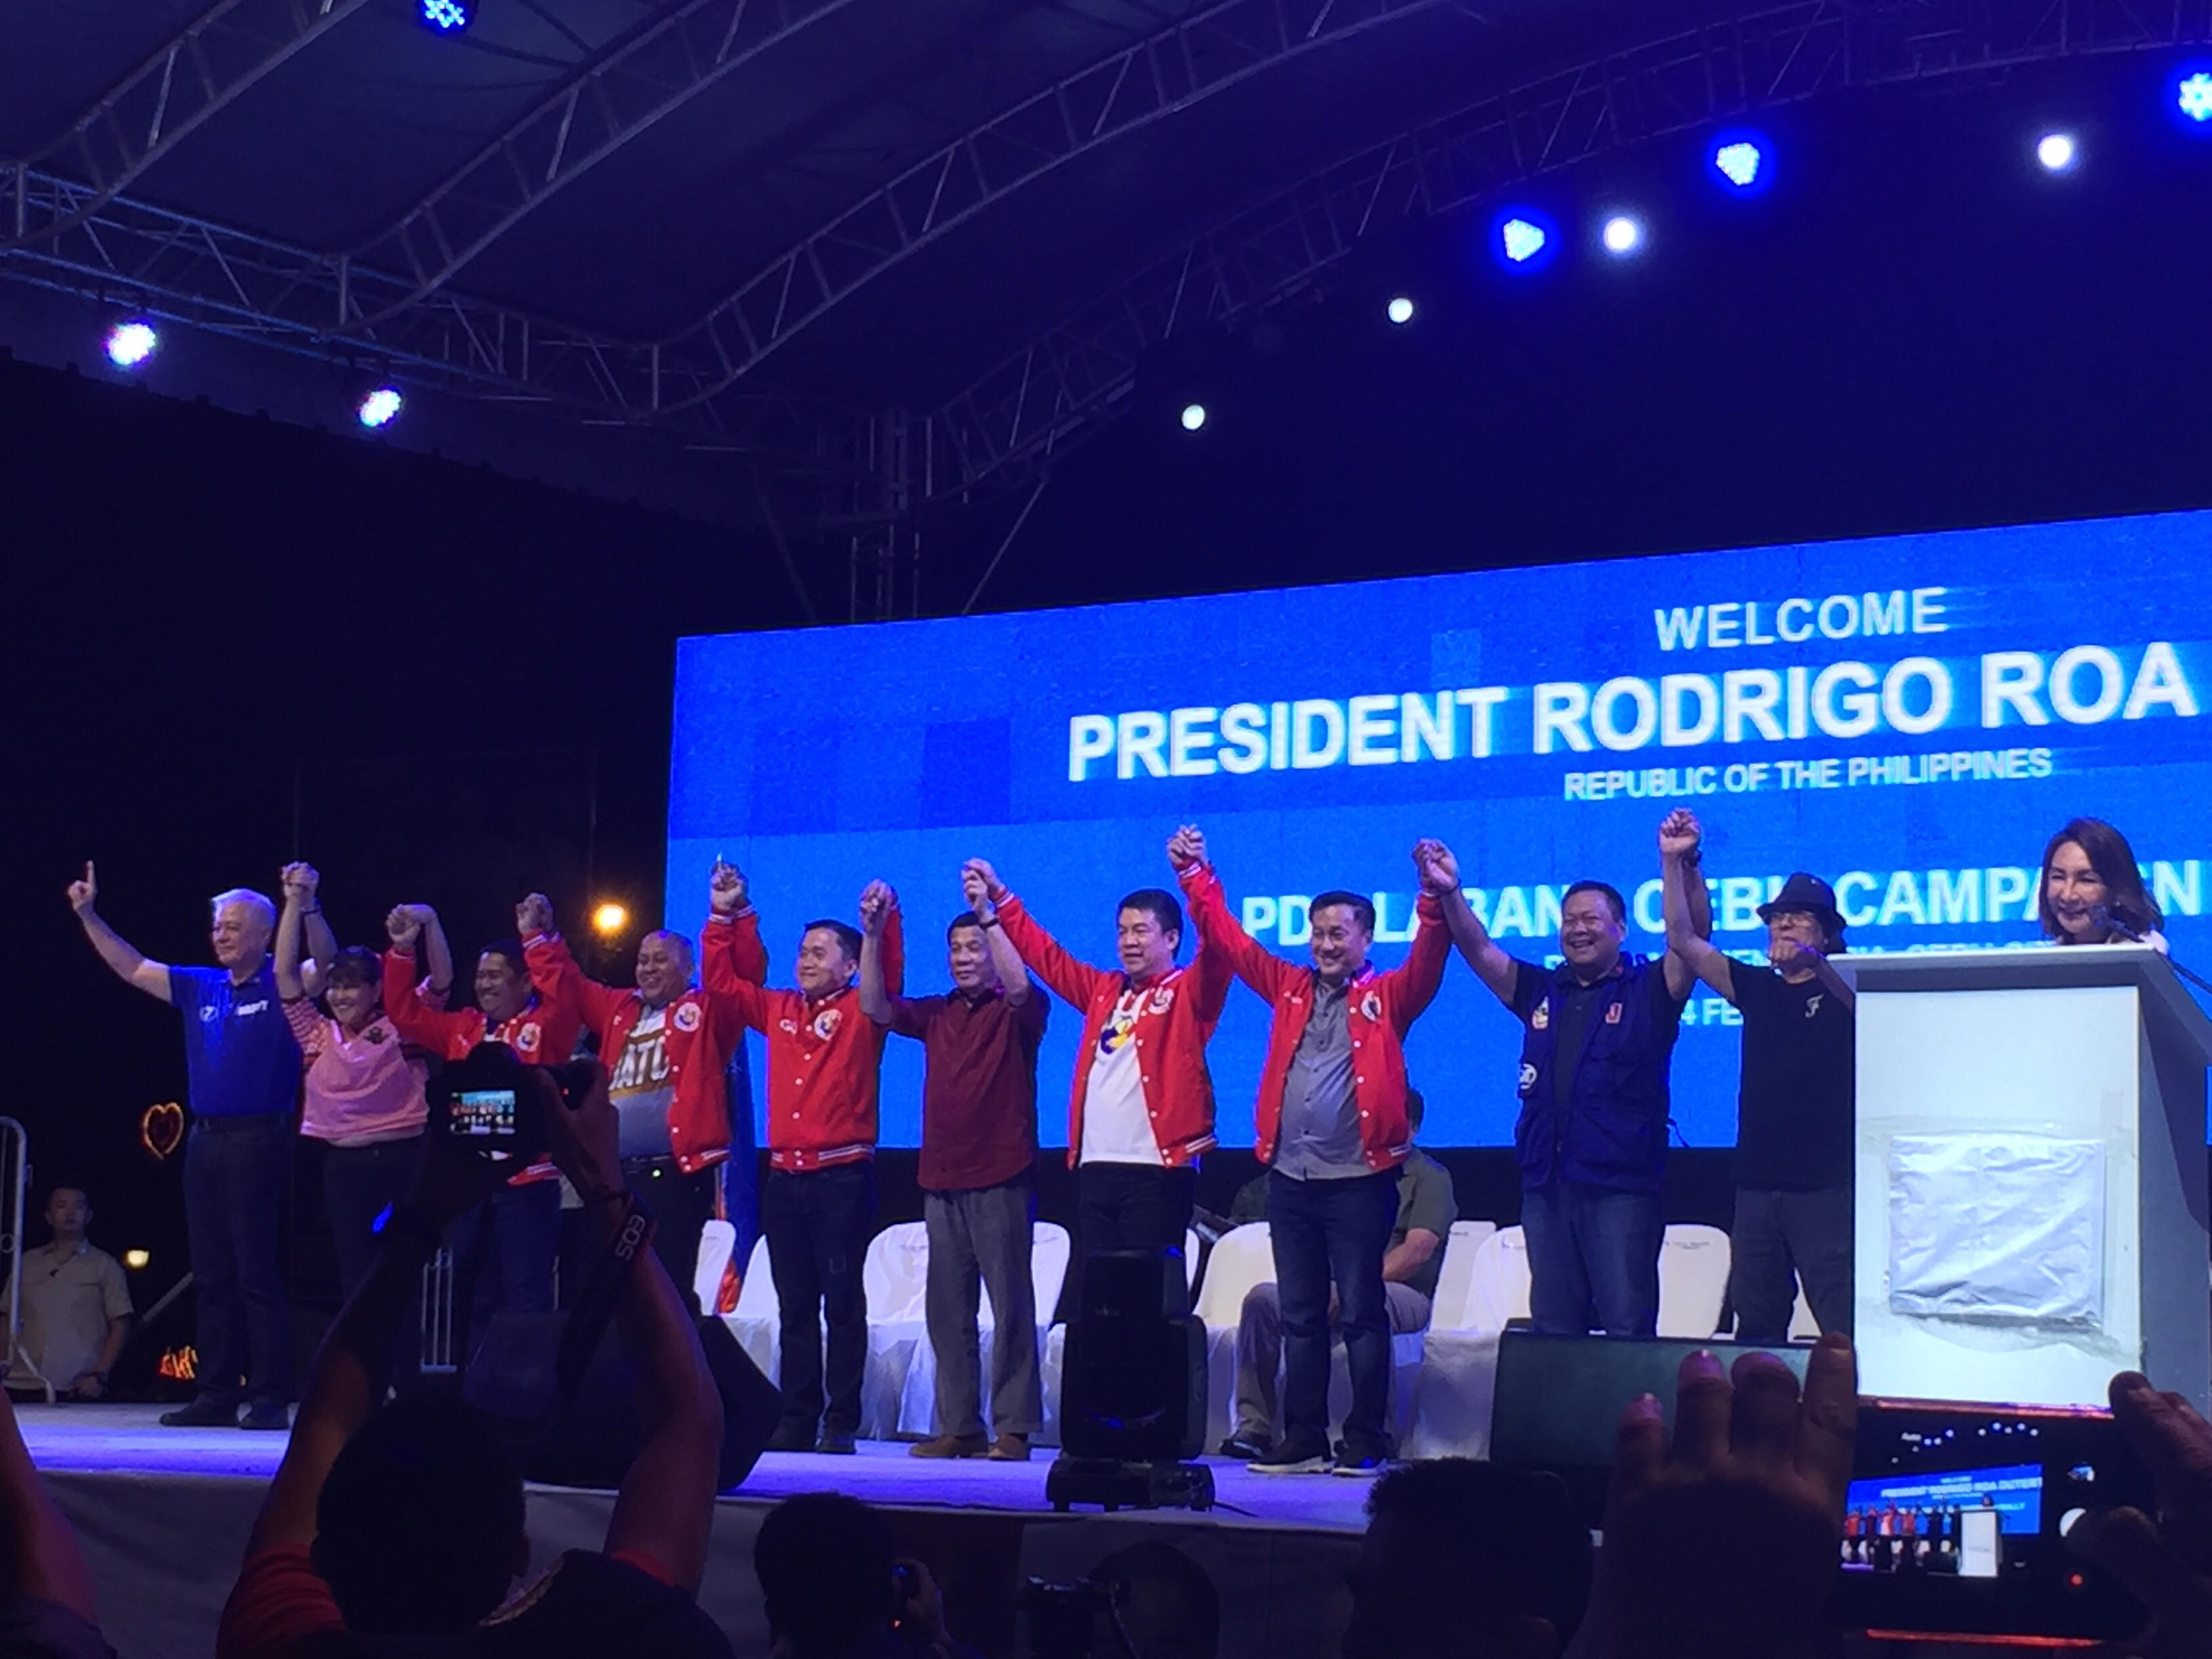 FAVOR. President Rodrigo (middle), at the PDP-Laban rally in Cebu City on February 24, 2019, endorses the gubernatorial bid of Gwen Garcia (rightmost) because her family helped his presidential campaign at the last minute in 2016. Photo by Micole Gerard Tizon/Rappler 